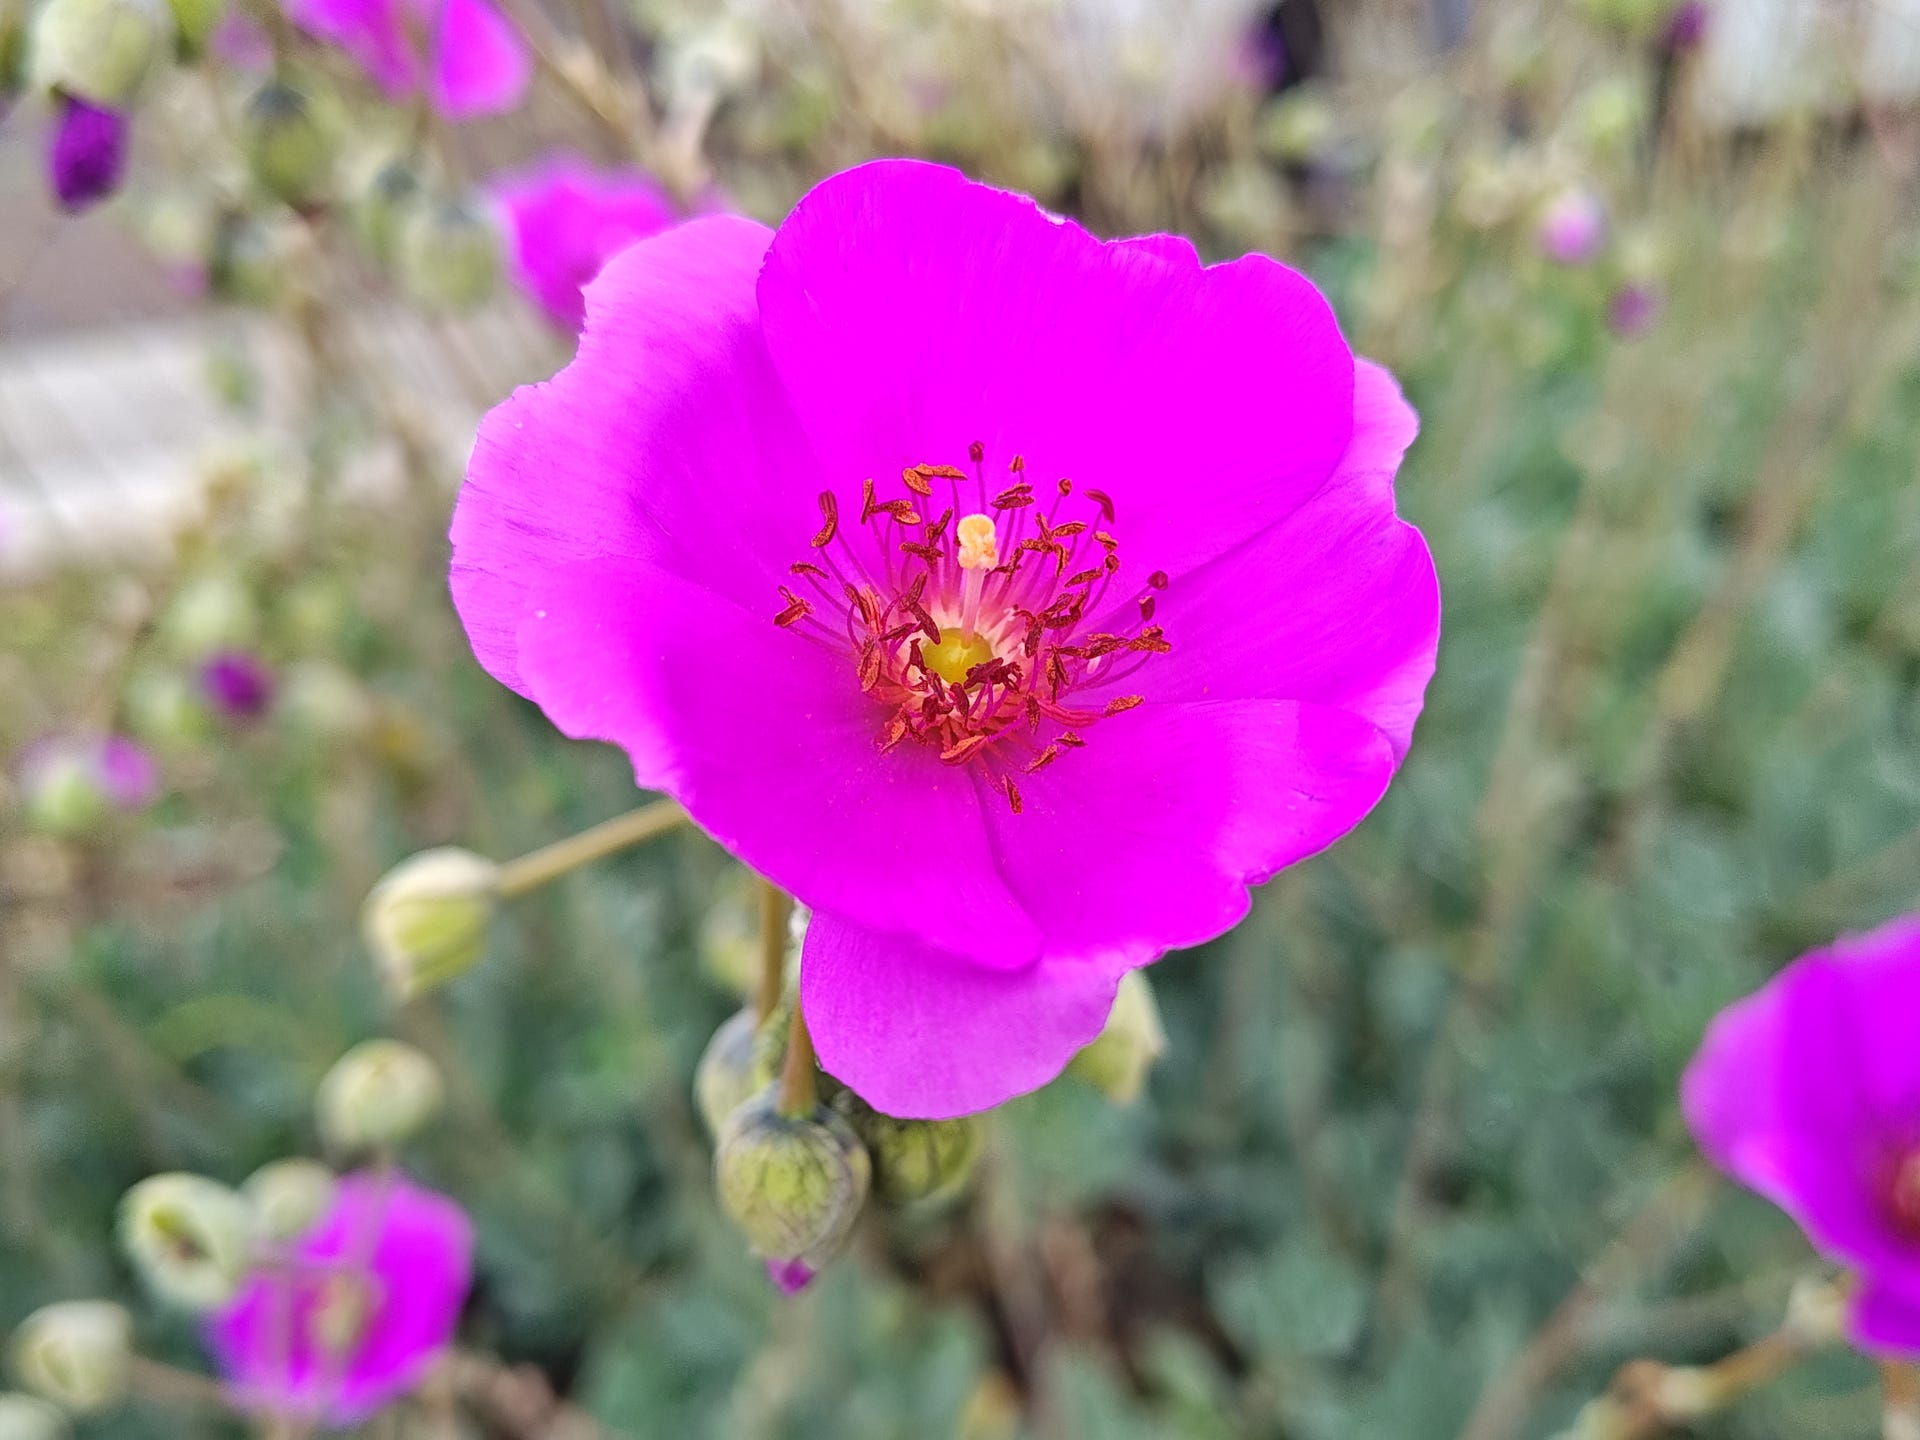 A pinkish purple flower sits in the foreground, but the colors blend together to make it hard to pick out petal edges.